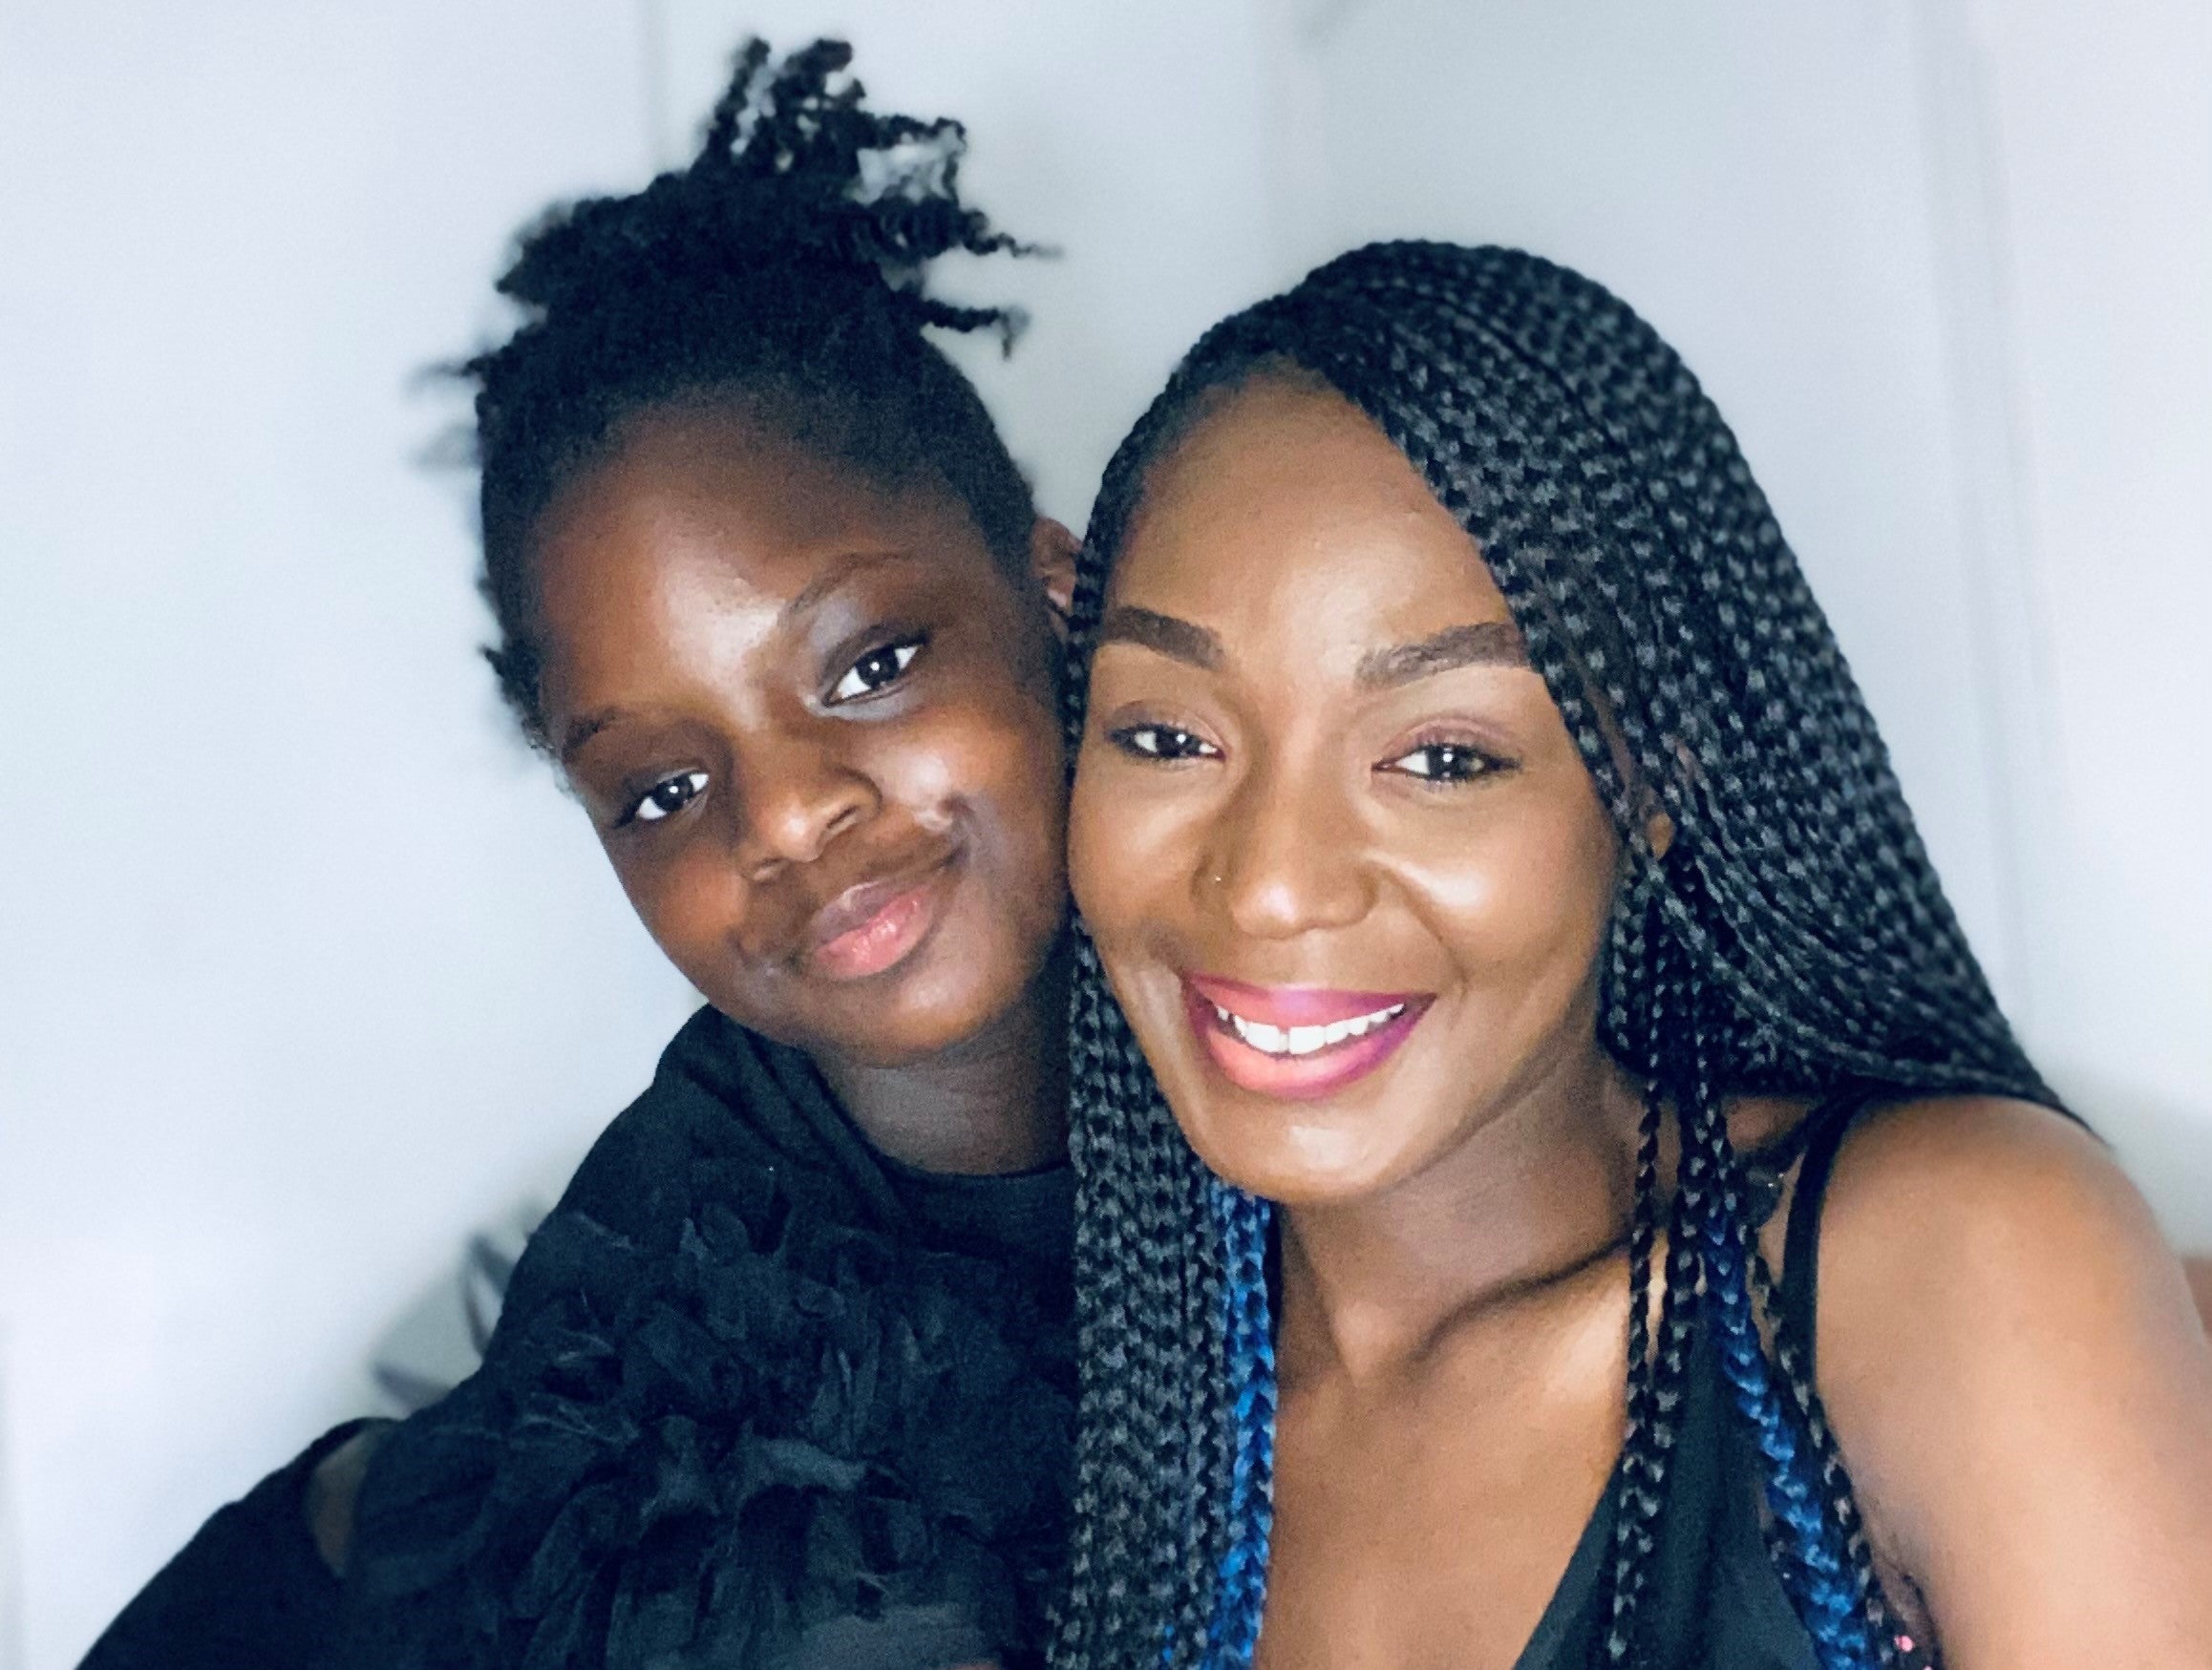 Chanel Taylor, 36, and her 11-year-old daughter